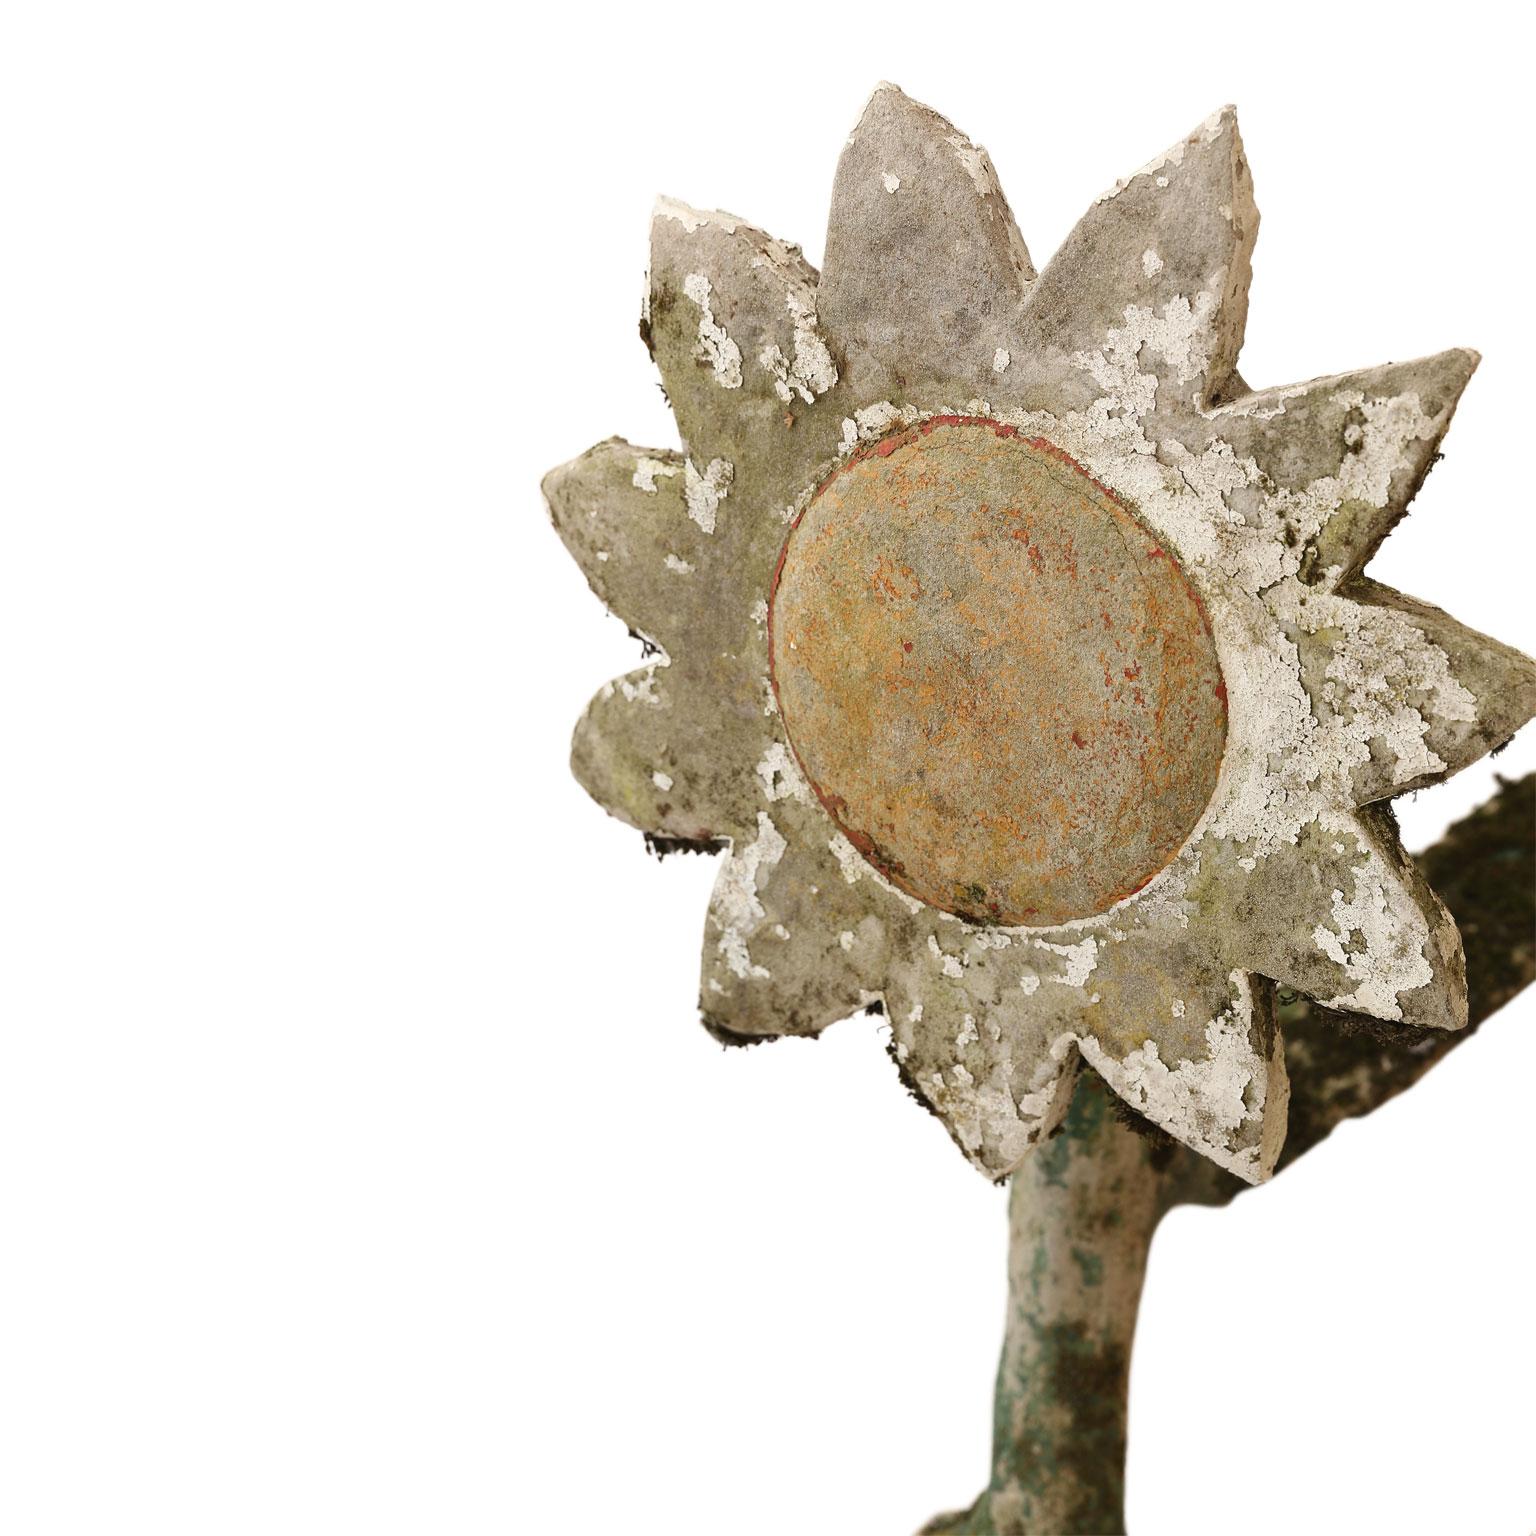 Folk Art cement sunflower: tall whimsical sunflower sculpture crafted by unknown French folk artist, circa 1940-1969. Incredible patina includes remnants of weathered paint and moss.